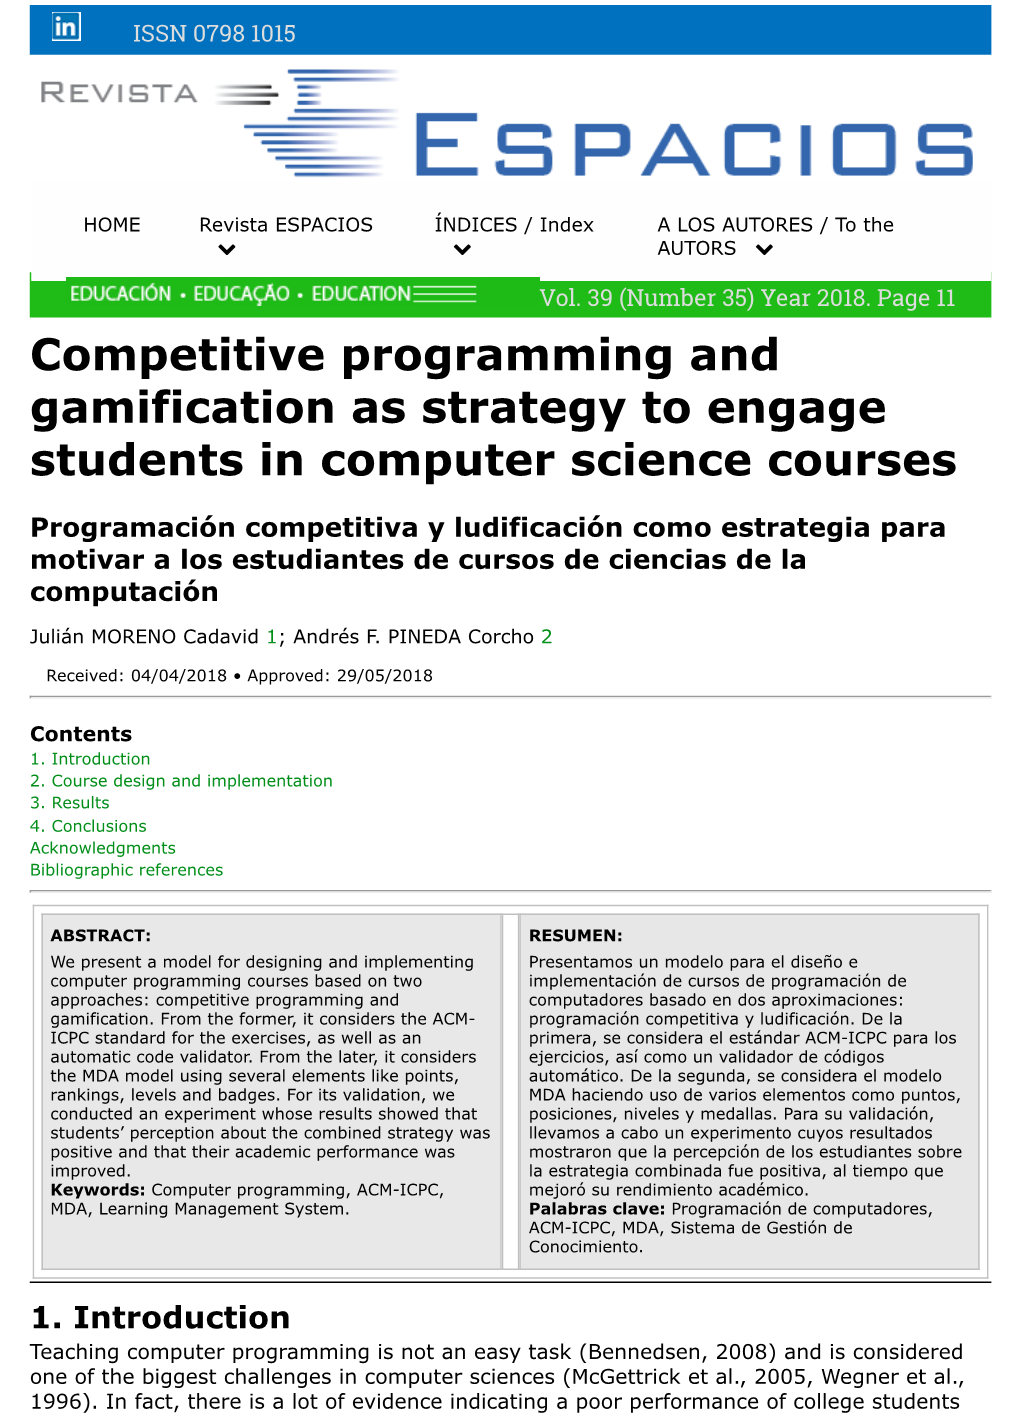 Competitive Programming and Gamification As Strategy to Engage Students in Computer Science Courses